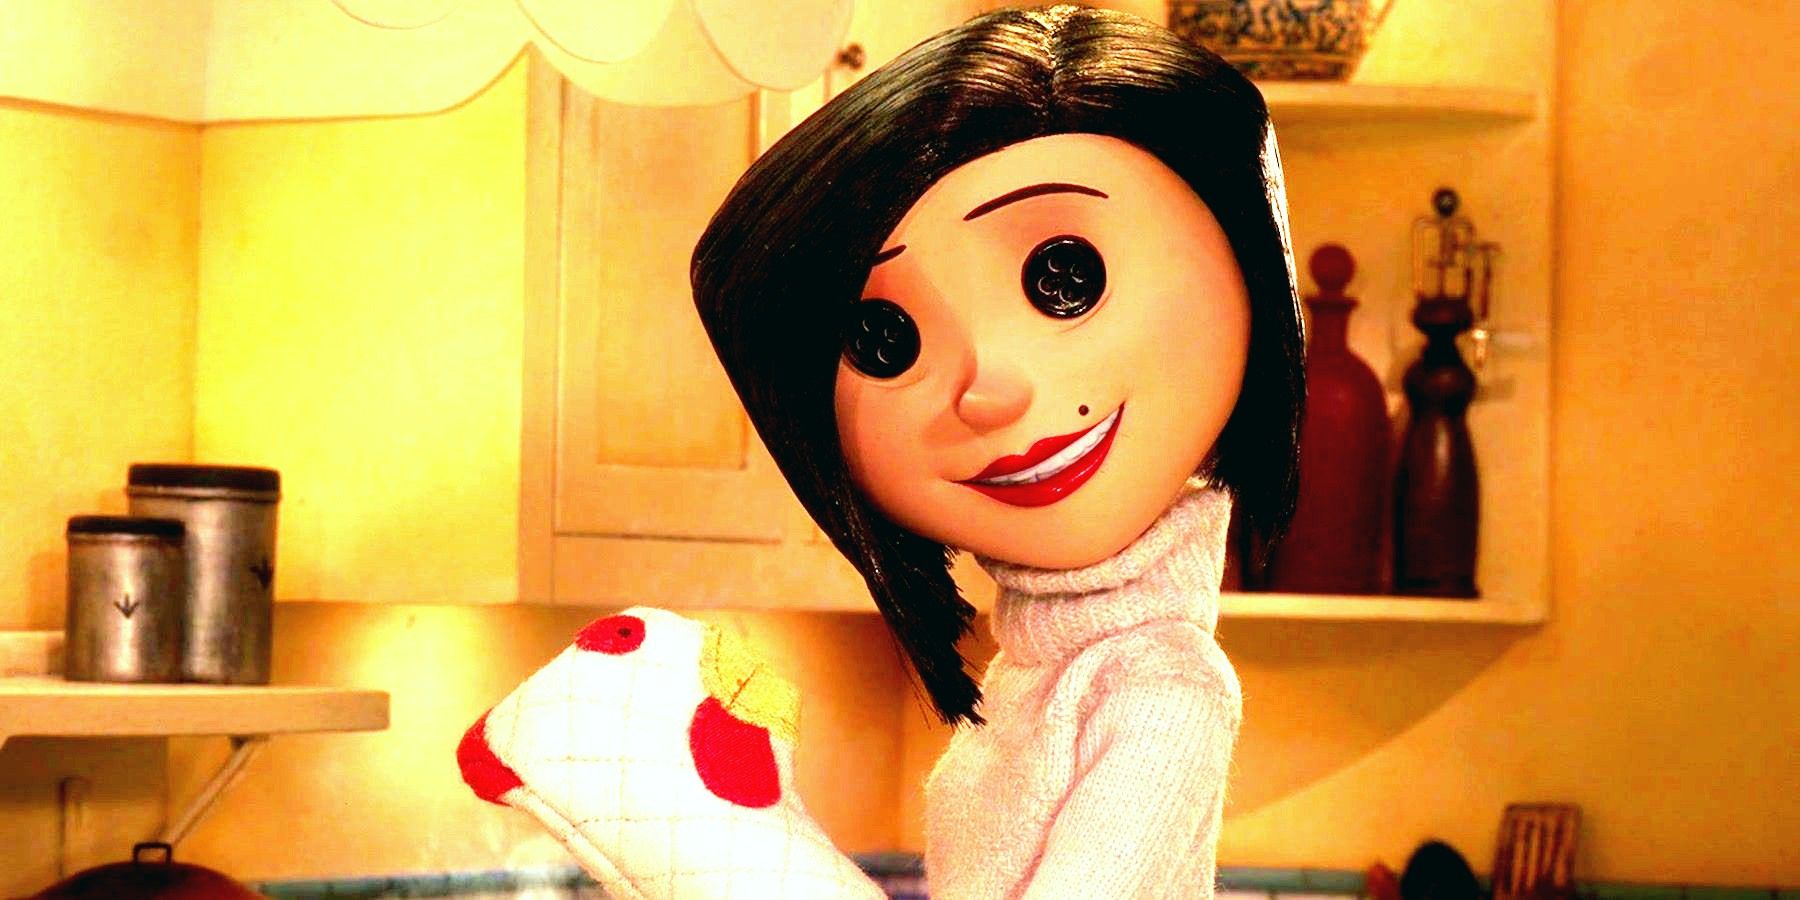 The Other Mother washing dishes as seen in Coraline